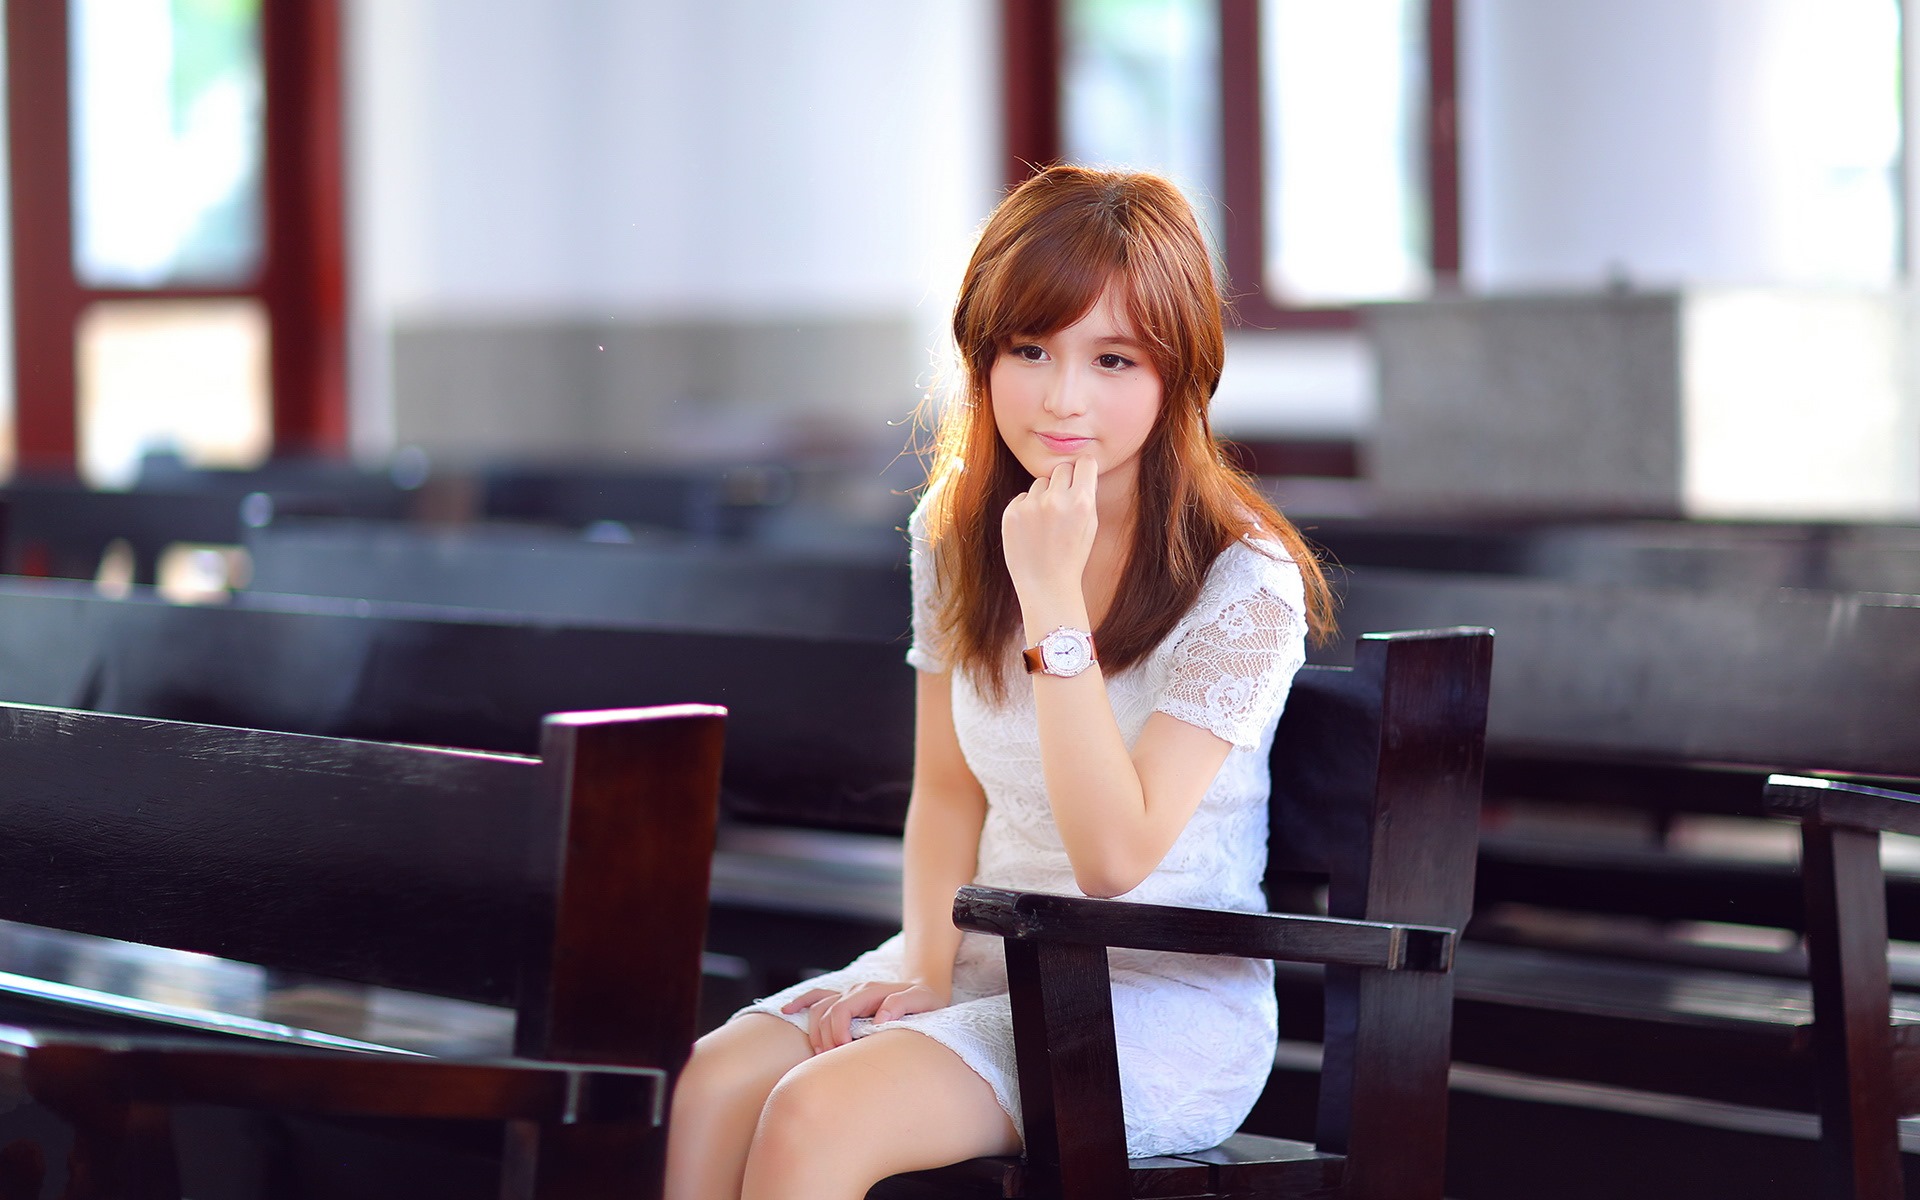 Pure and lovely young Asian girl HD wallpapers collection (2) #37 - 1920x1200